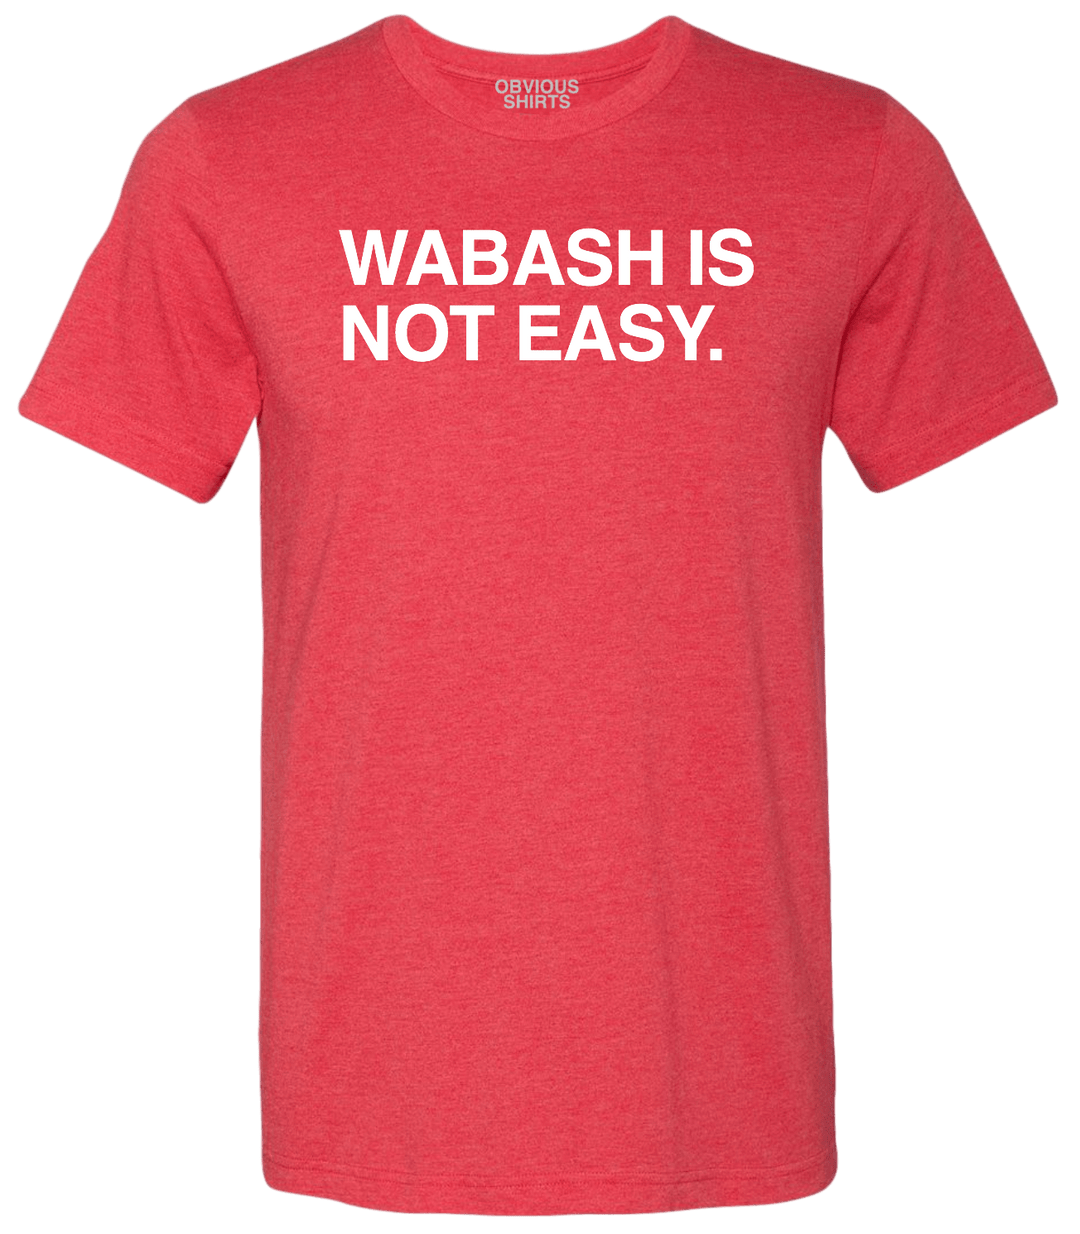 WABASH IS NOT EASY. - OBVIOUS SHIRTS.